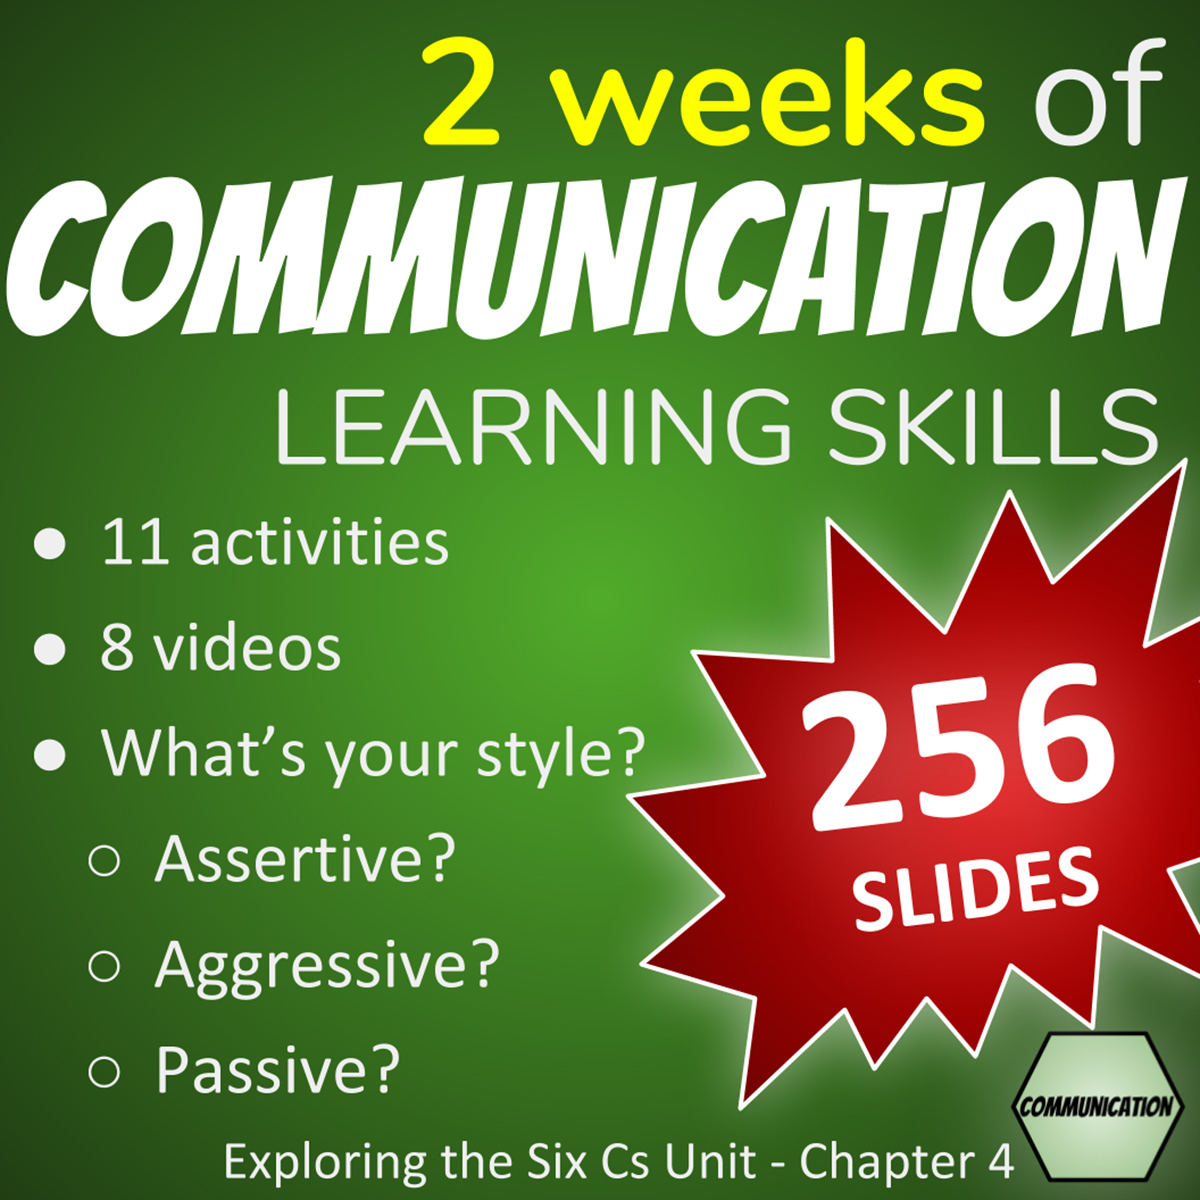 Effective Communication Lesson Plans - 2 weeks of Communication Learning Skills: 11 activities, 8 videos, What's your style - assertive, aggressive, passive, 256 SLIDES